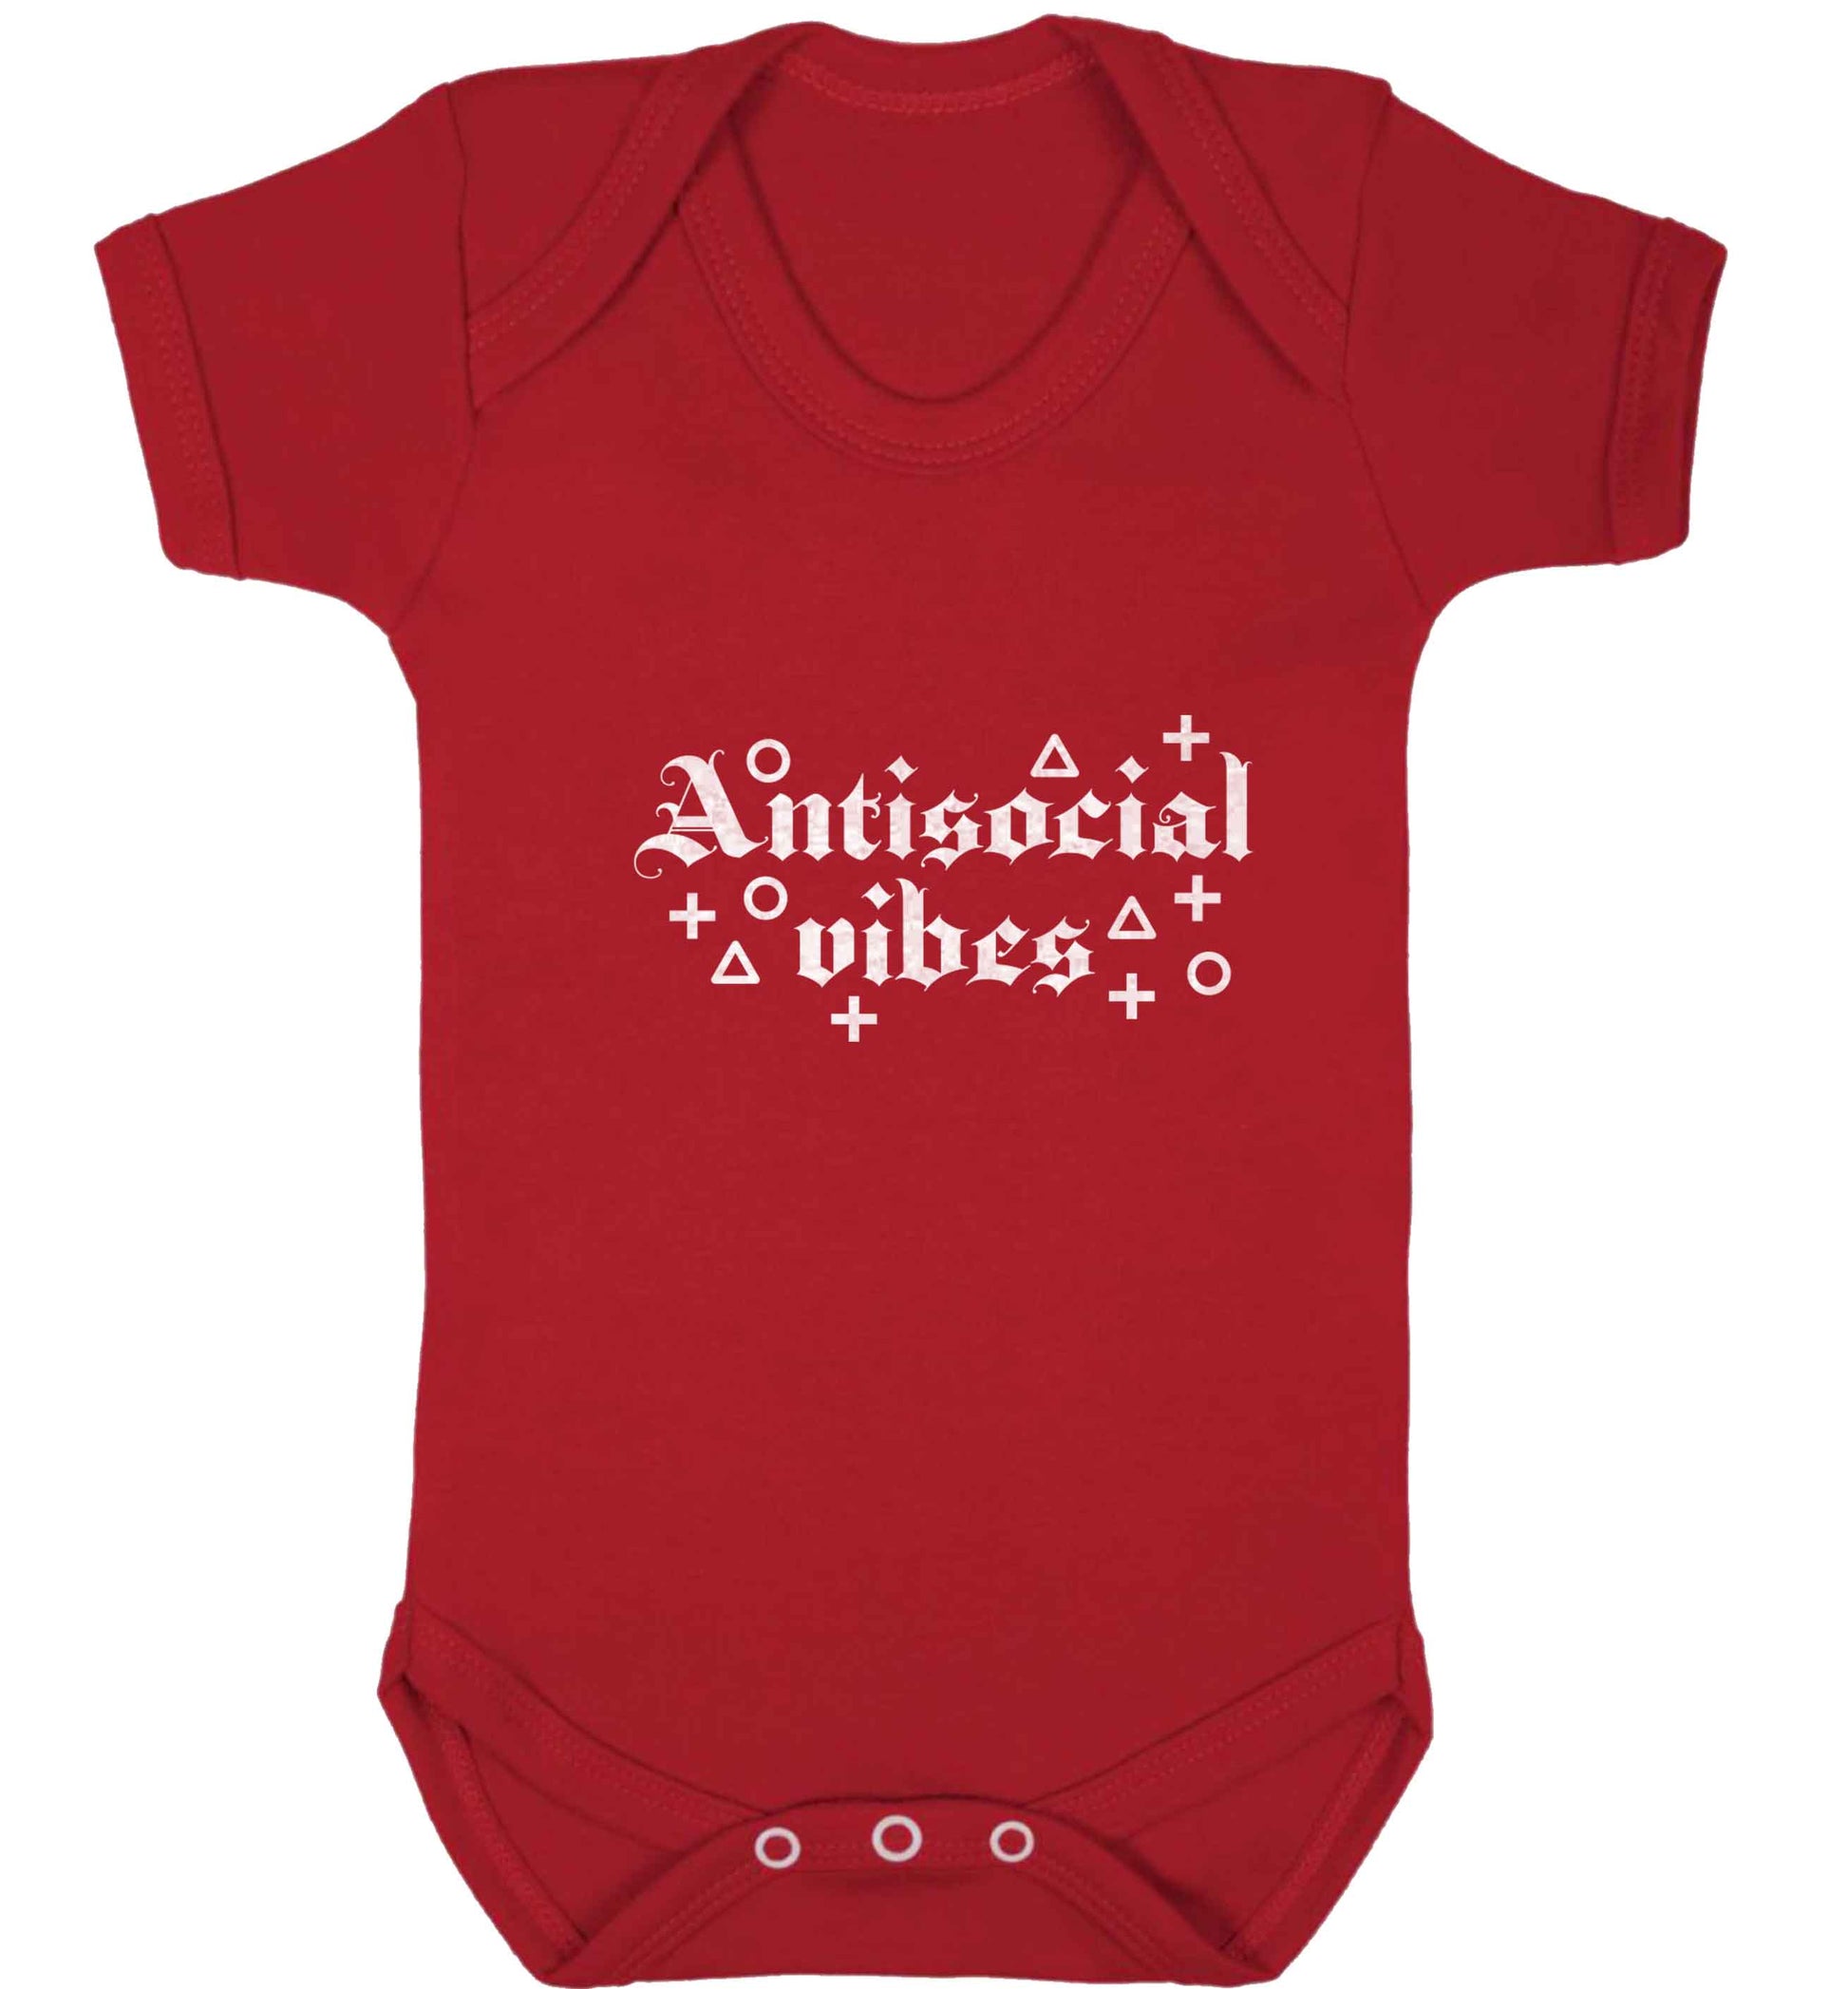 Antisocial vibes baby vest red 18-24 months